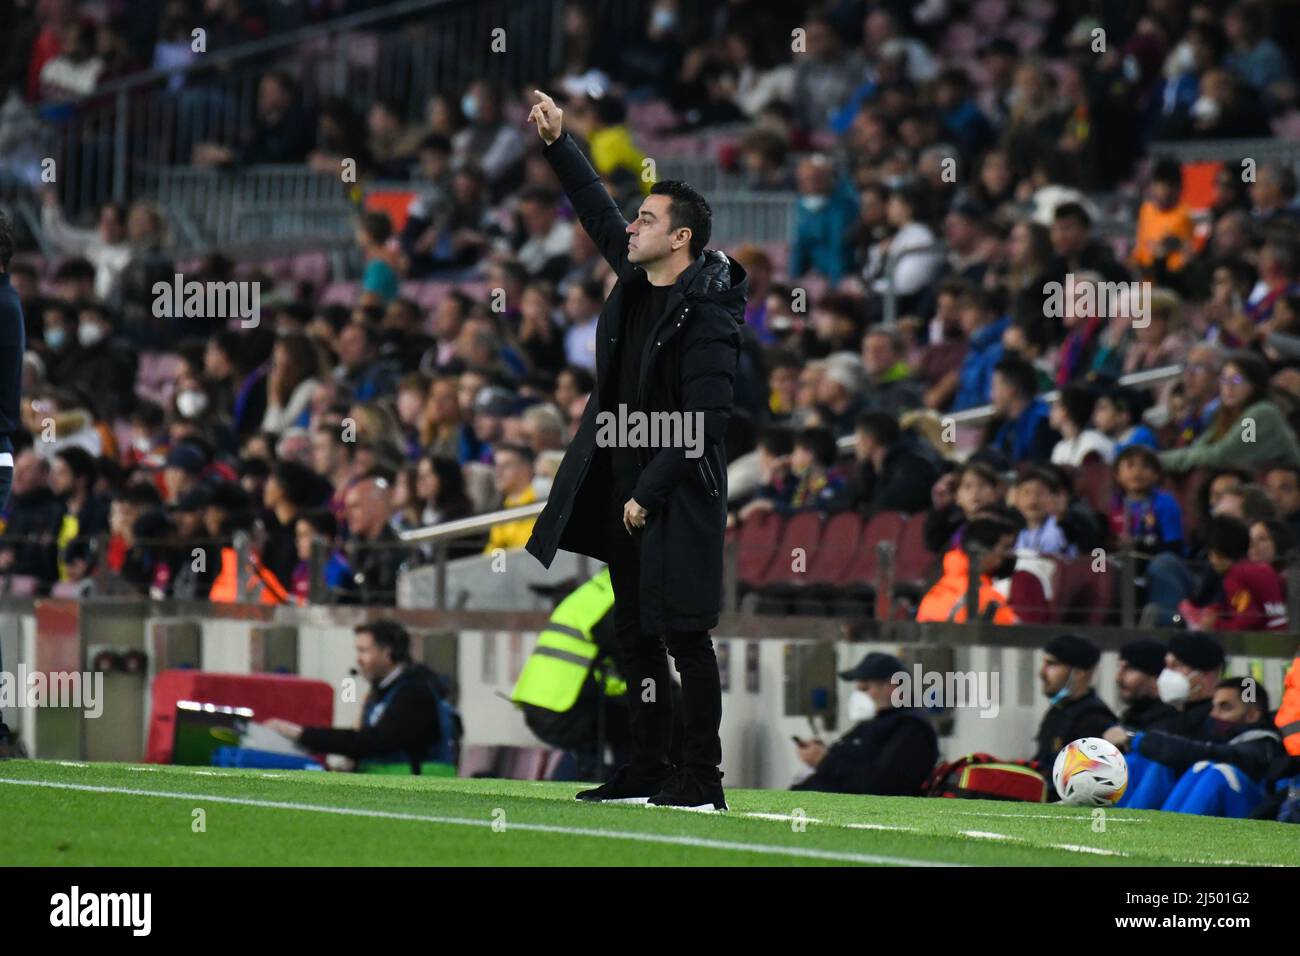 BARCELONA, SPAIN - APRIL 18: Xavi, Coach of FC Barcelona during La Liga 2022 match between FC Barcelona and Cádiz at Camp Nou on April 18, 2022 in Barcelona, Spain. (Photo by Sara Aribo/PxImages) Stock Photo